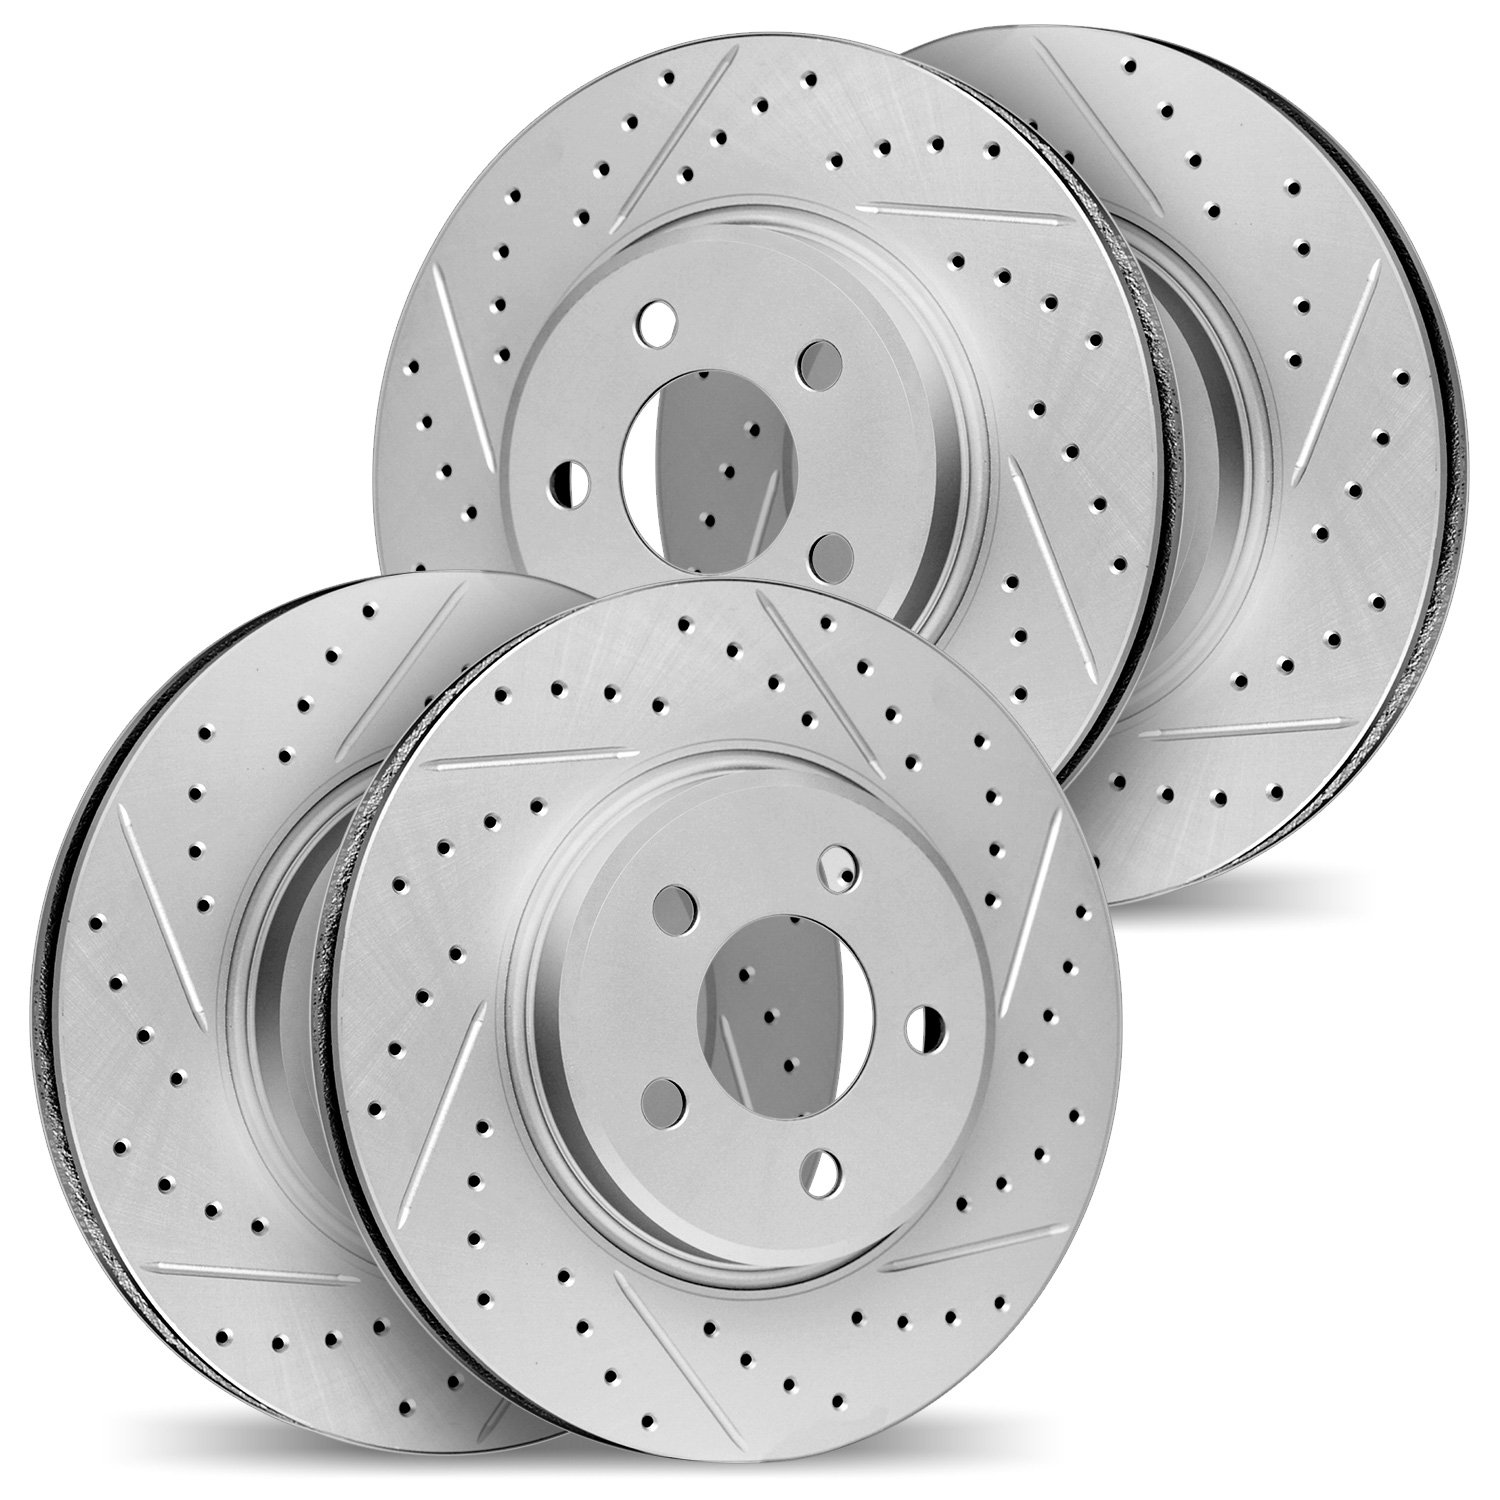 2004-47042 Geoperformance Drilled/Slotted Brake Rotors, 2014-2019 GM, Position: Front and Rear